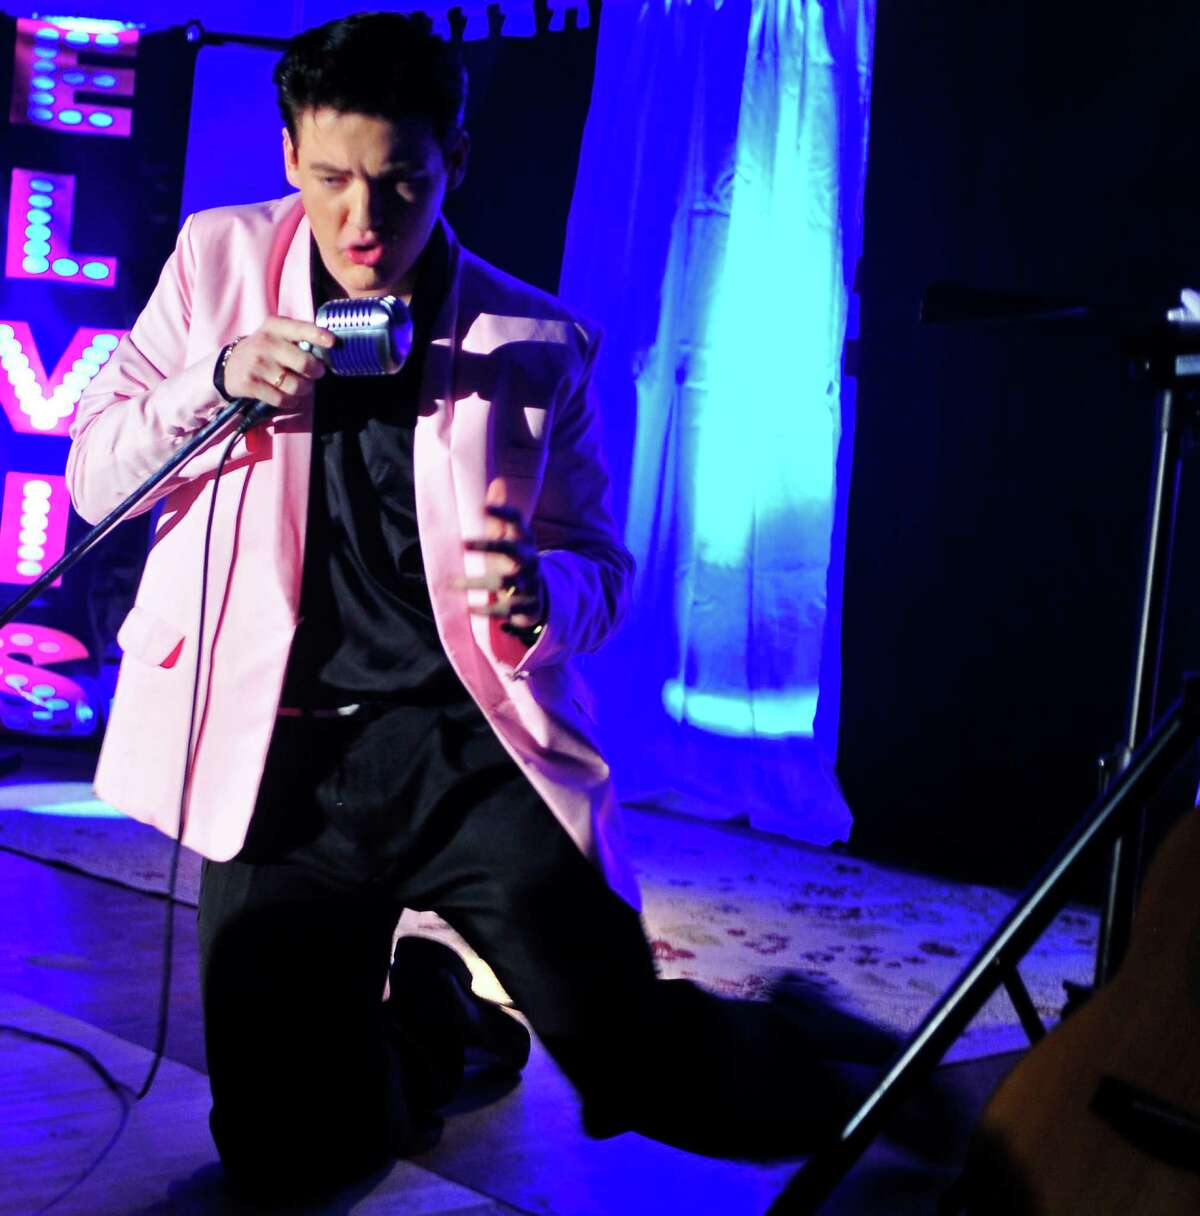 Nederland resident Jake Rowley, 18, performed his first live show as the American music giant - Elvis Presley - on Friday night at the County Seat Music Hall in Kountze. Photo by Cassie Smith/@smithcassie. March 14, 2014.